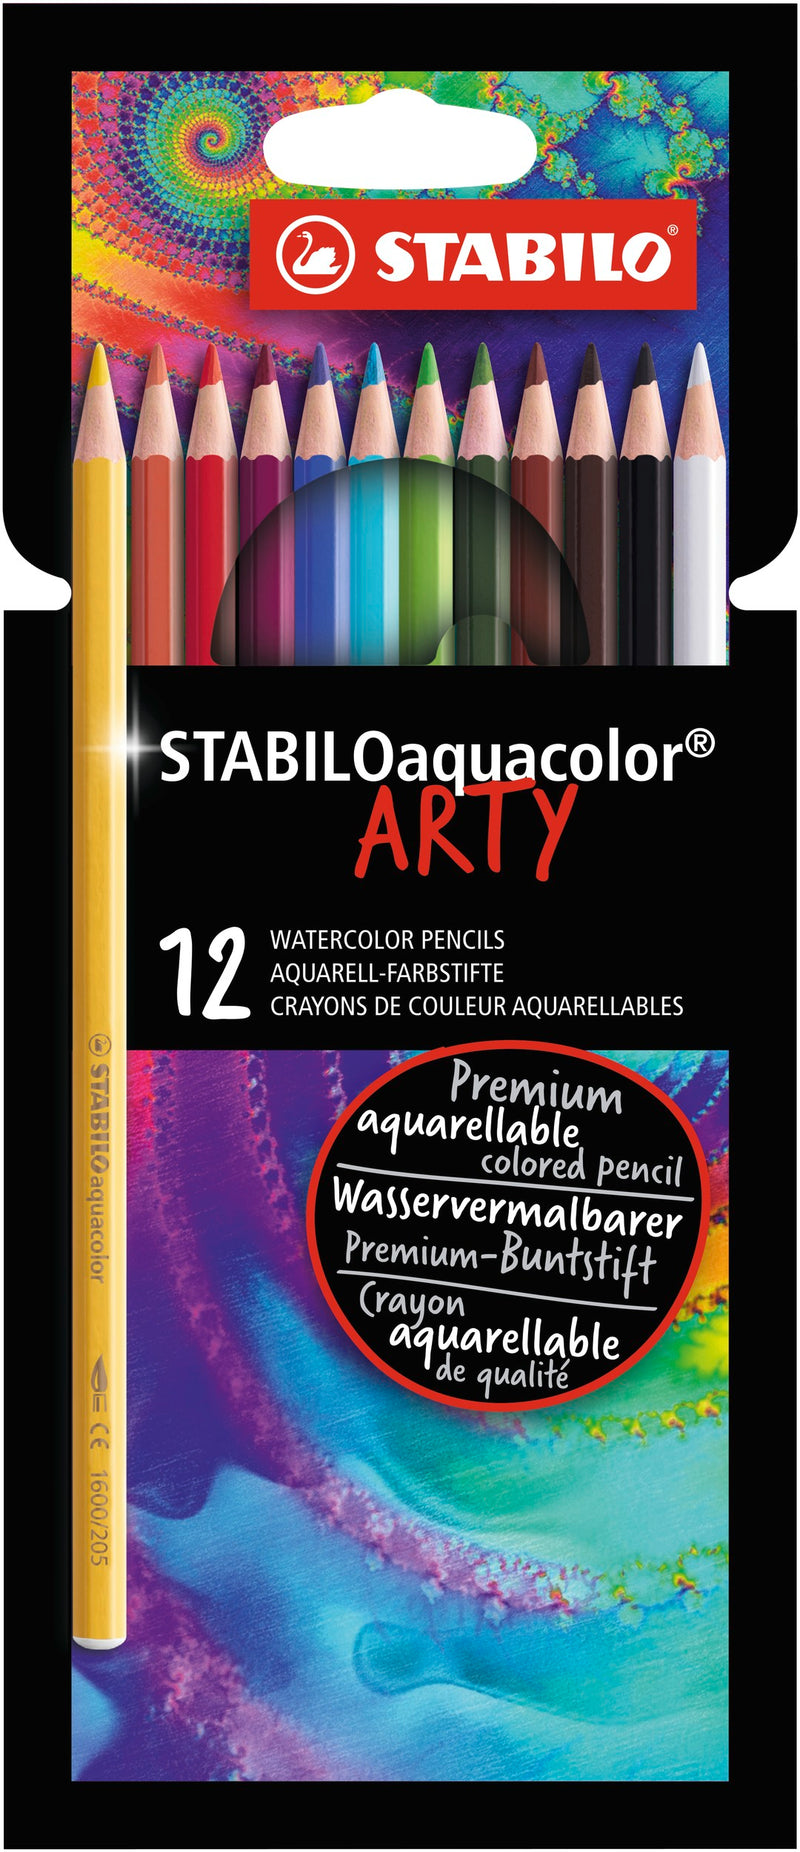 STABILO Aquacolor Watercolour Pencils ARTY - Pack of 12